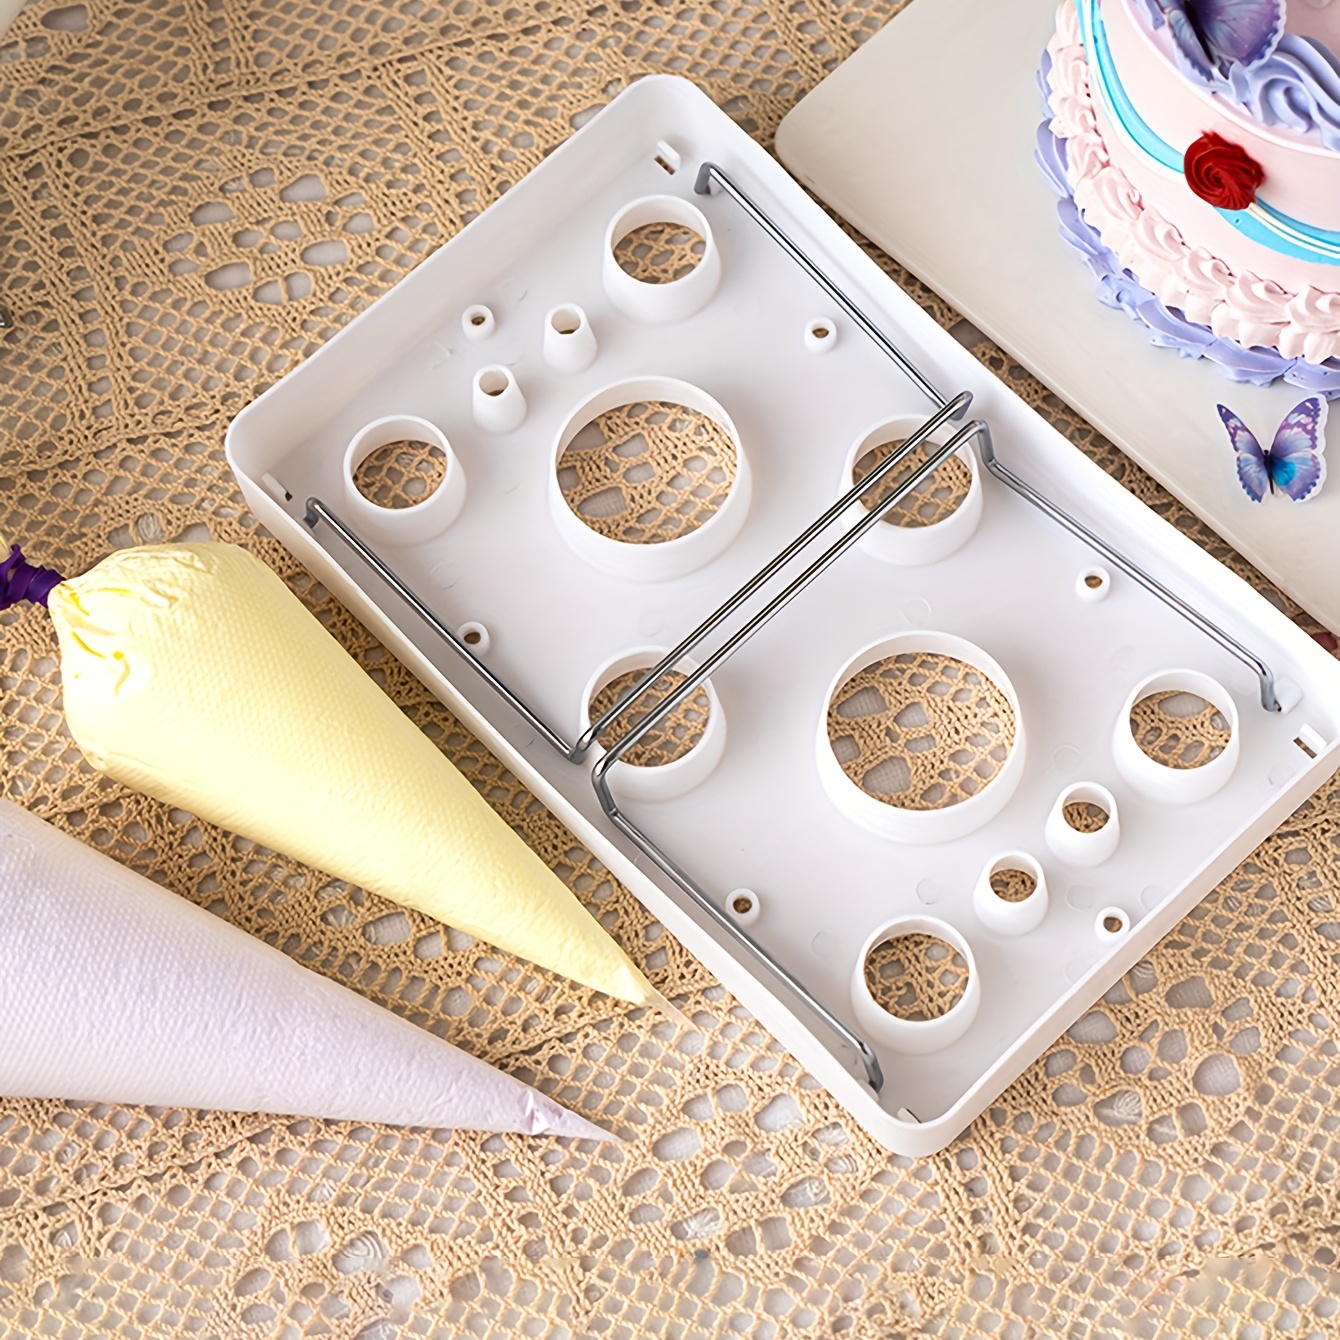 D-GROEE Piping Bag Rack with 9 Holes Flower Mouth Implantation Frame DIY  Baking Tool Display Tray Plastic Piping Icing Tip Holder Cake Decorating  Tool